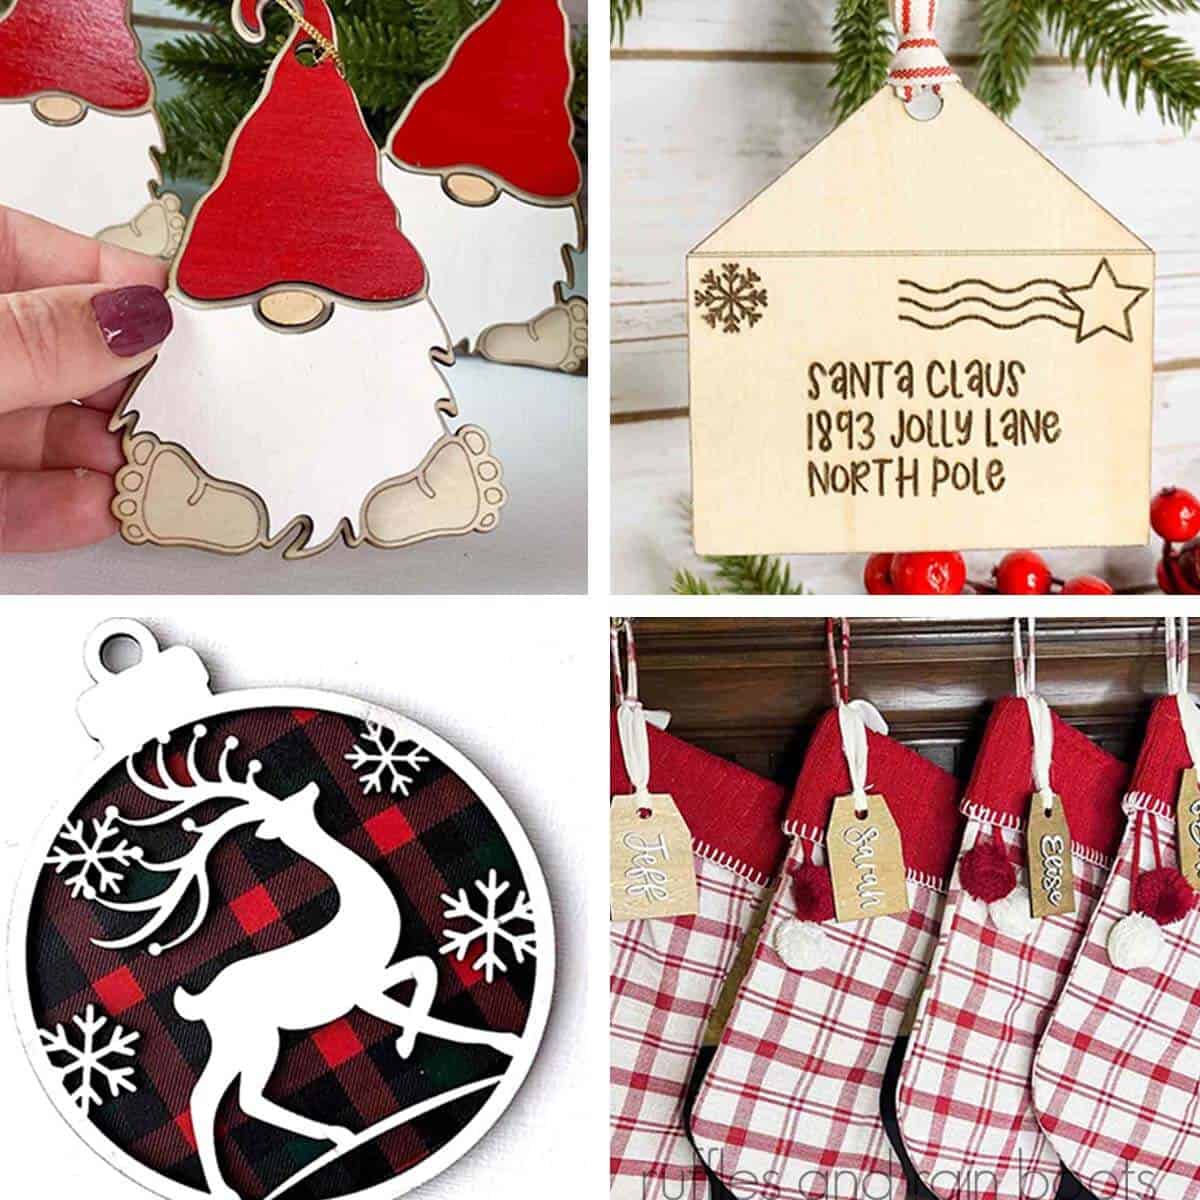 Four image square collage of ornaments, tags, and other laser Christmas craft ideas.